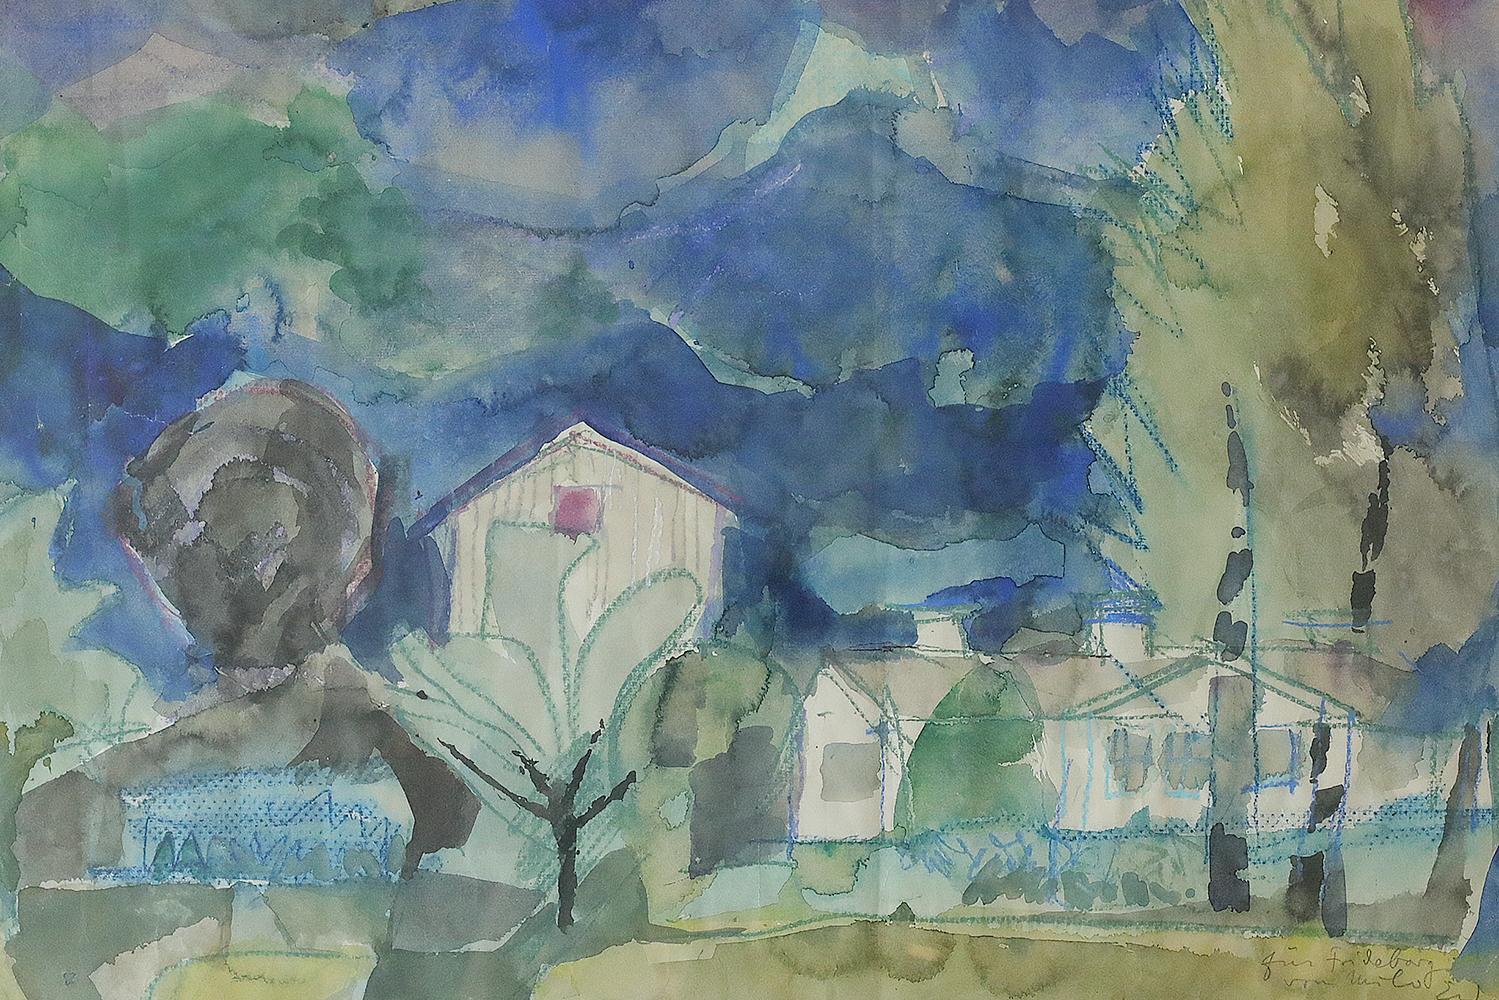 Frideborg Bryth, 1950s
Watercolor
Work signed by the artist
Dimensions 60/73
Framed work

Frideborg Bryth (1910 - 2007). She was born in Huskvarna. She was married to the artist Lennart Lilja. They had the studio together and focused mainly on oil